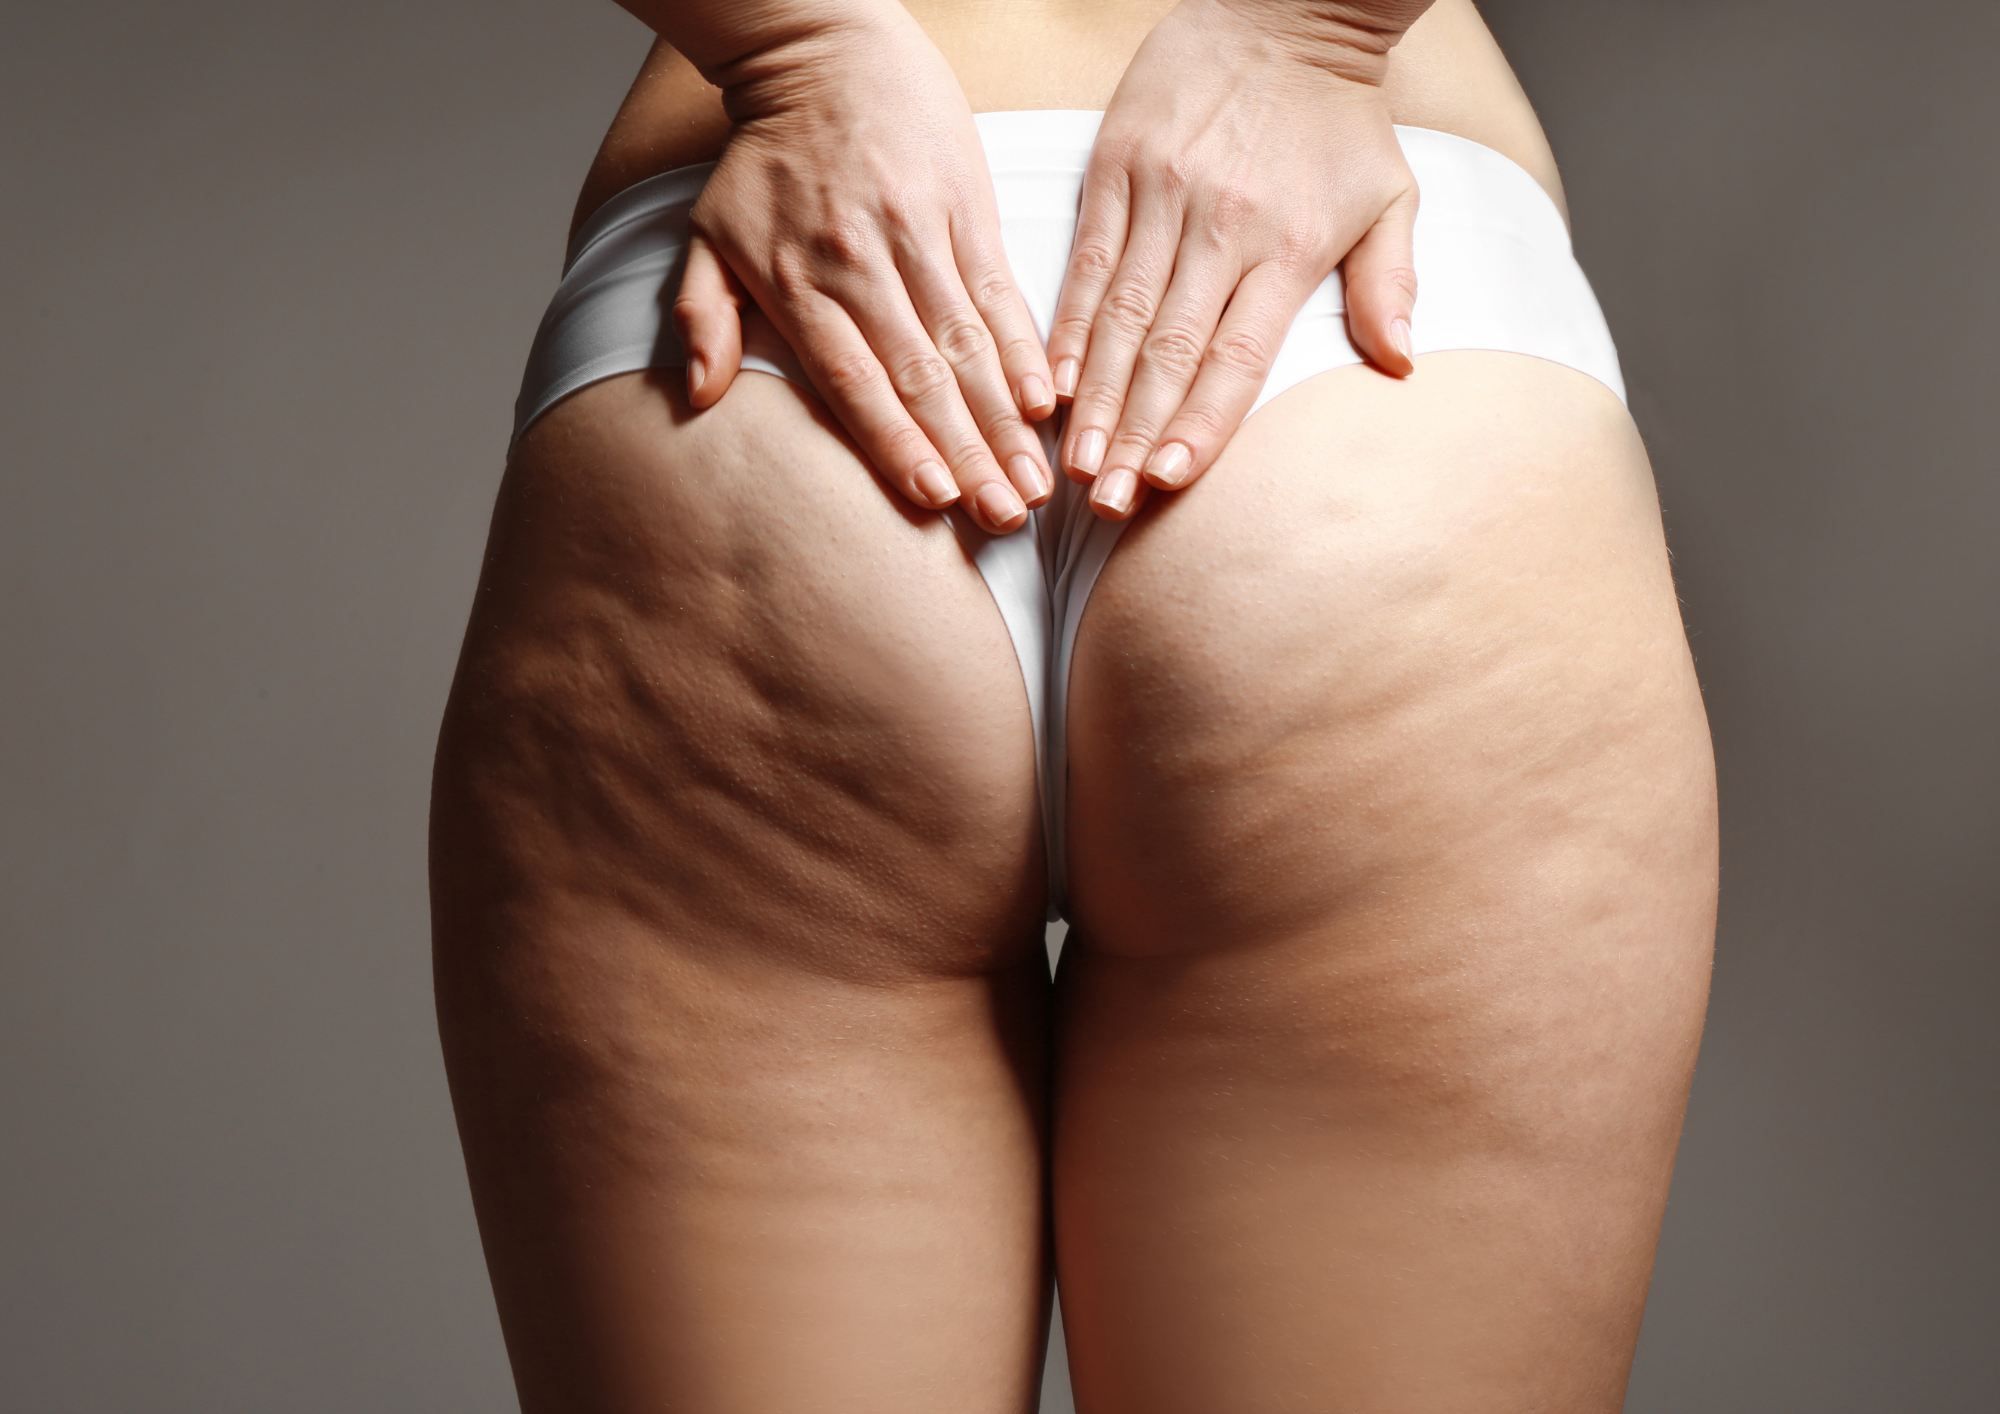 The Best Anti-Cellulite Treatment Options to Help Reduce the Appearance of Cellulite